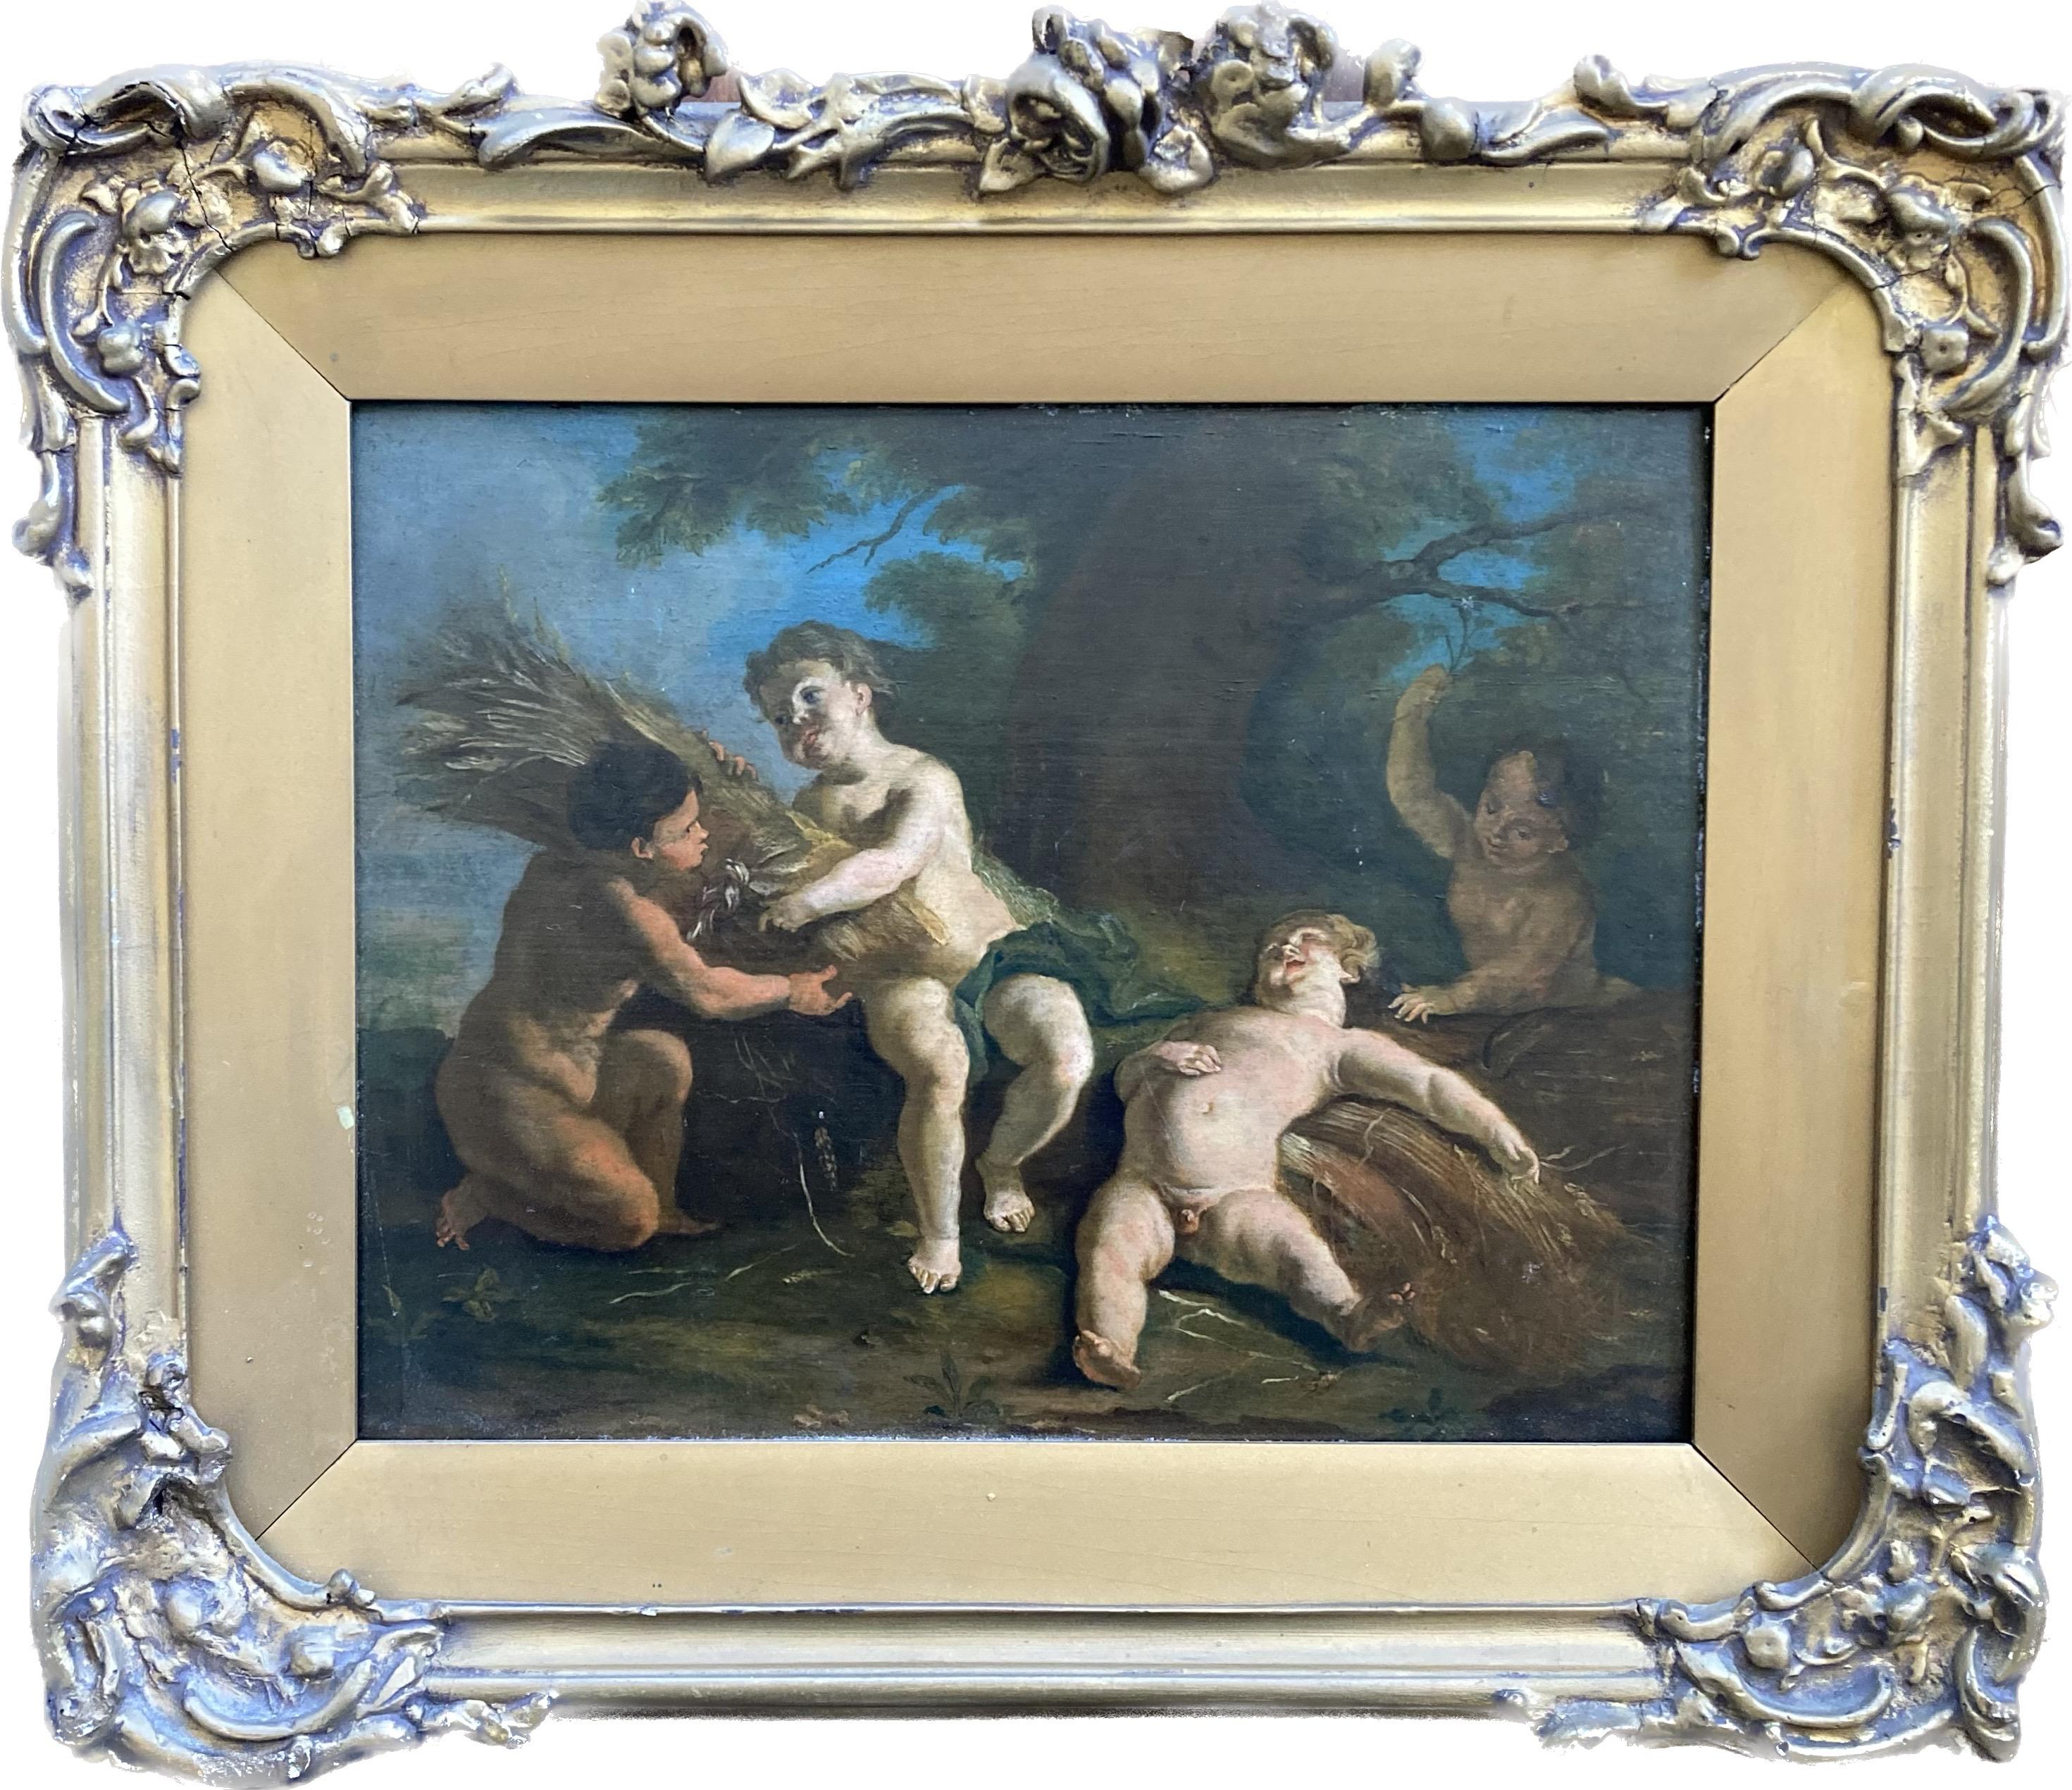 Jean-Honoré Fragonard Landscape Painting - Old master painting of Cherubs cavorting in a woodland setting